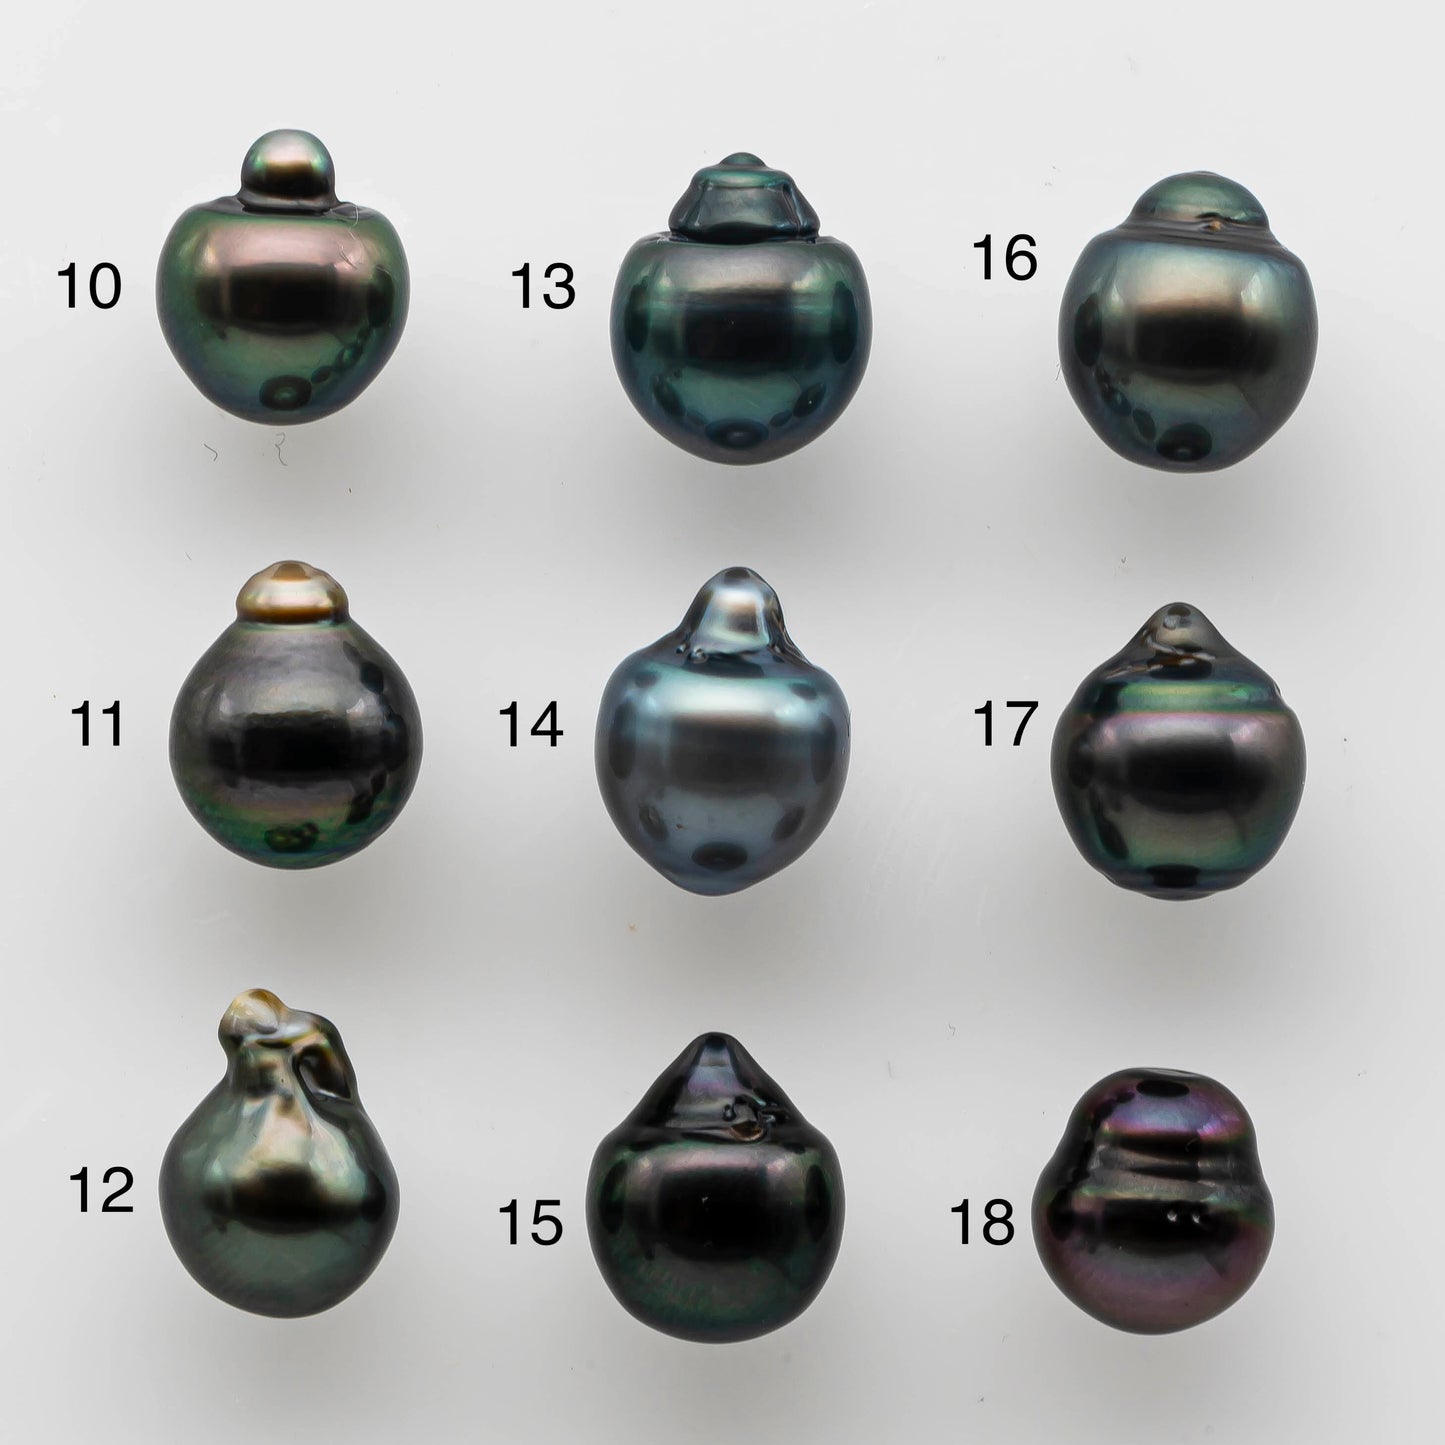 9-10mm Teardrop Tahitian Pearl One Single Piece Teardrop Loose Undrilled in High Luster and Natural Color, SKU # 1472TH